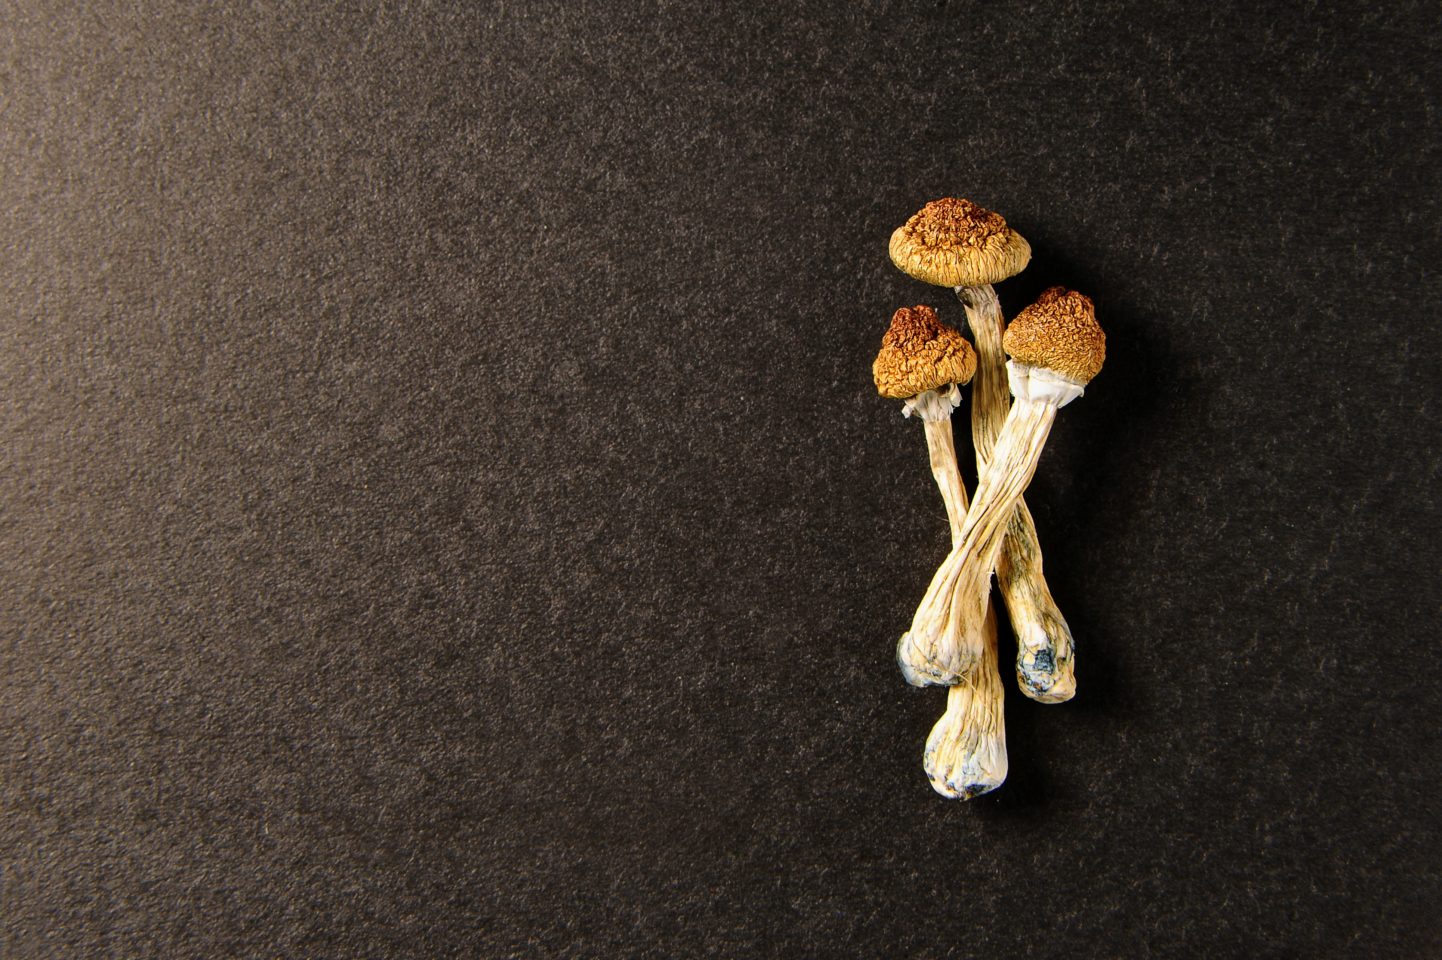 Oregon County Proposes Ban on Psilocybin Therapy